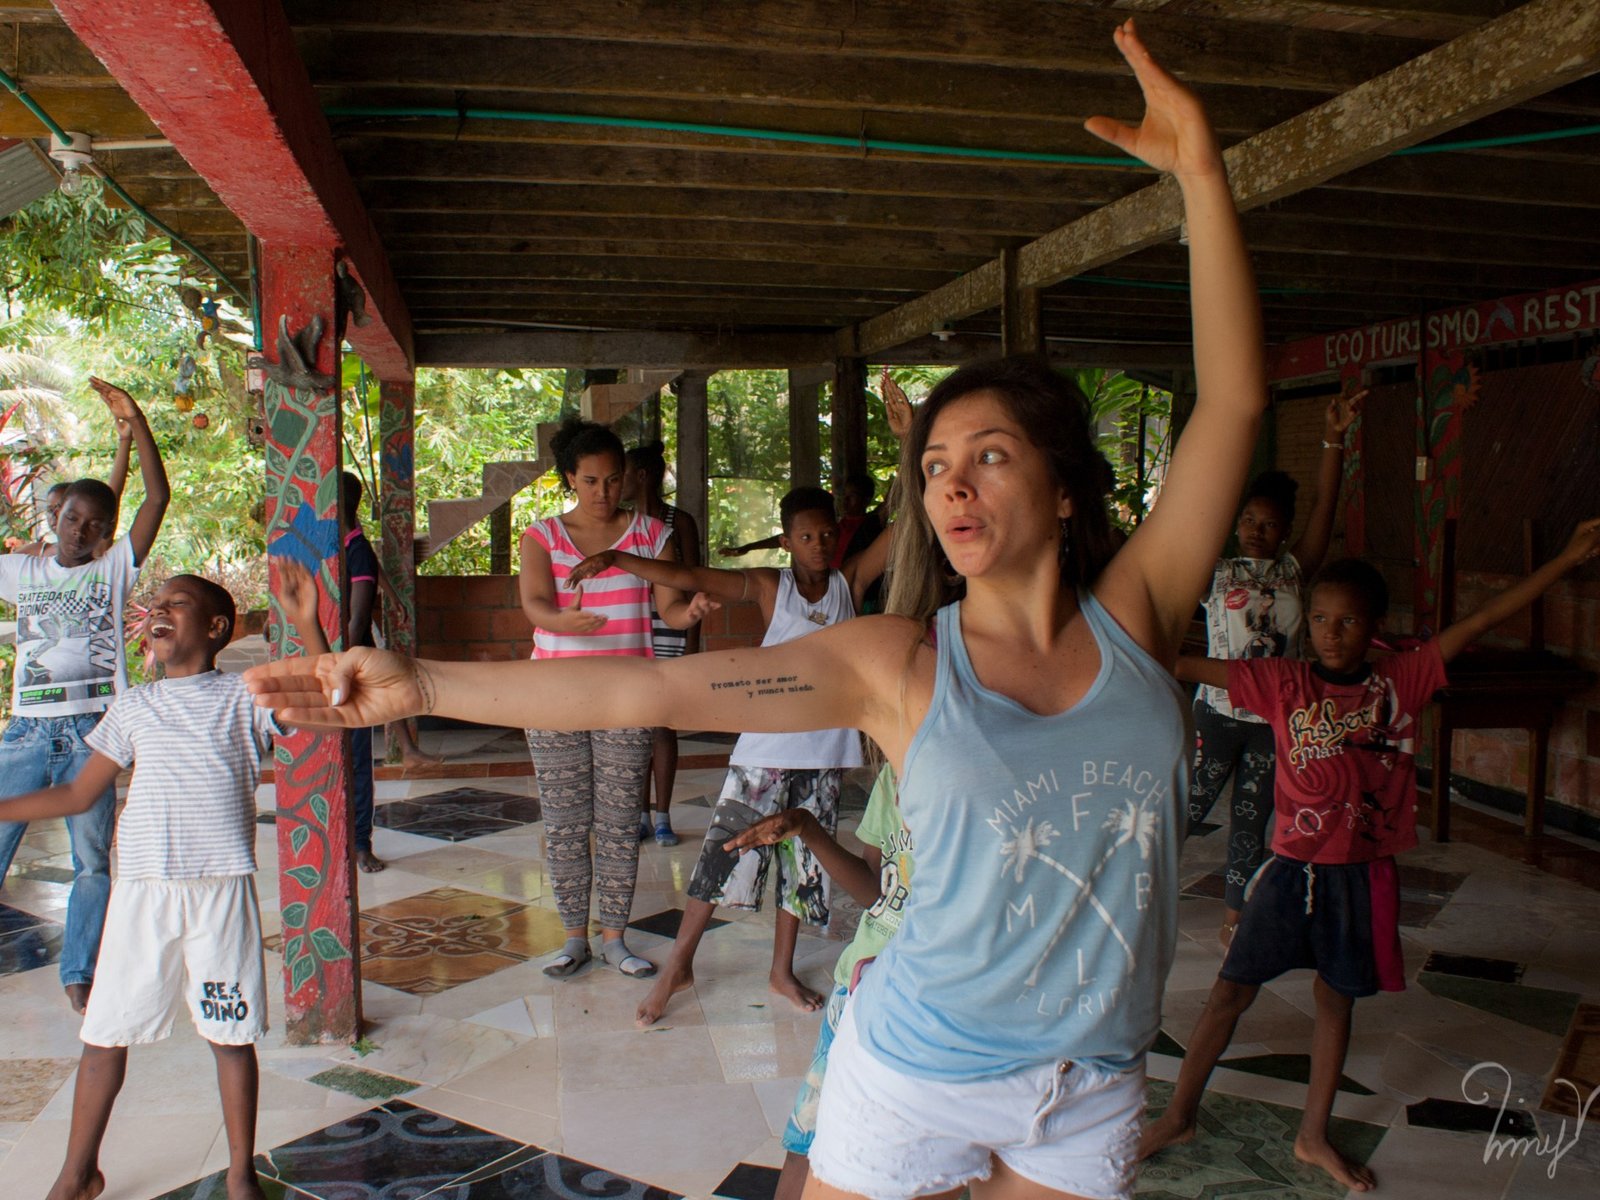 Facing high rates of sexual violence, Colombia turns to salsa as therapy | Sexual Assault